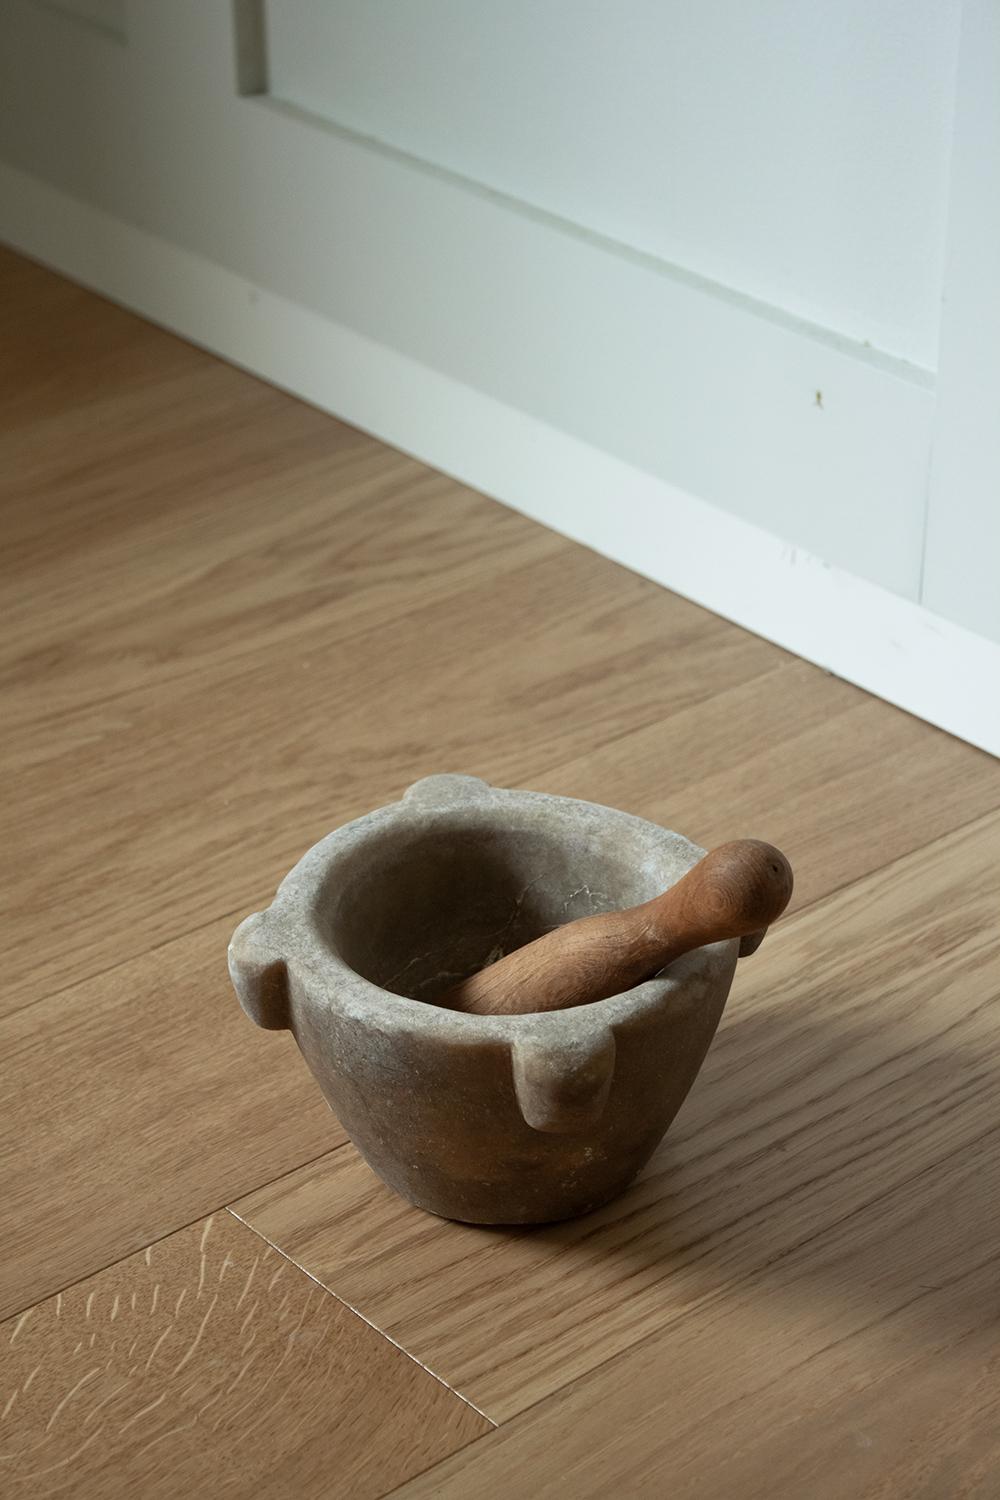 A petit antique French mortar with a smooth surface and great patina, the perfect accent piece in any kitchen or interior to add a rustic french flair.

This mortar has been sourced in the south of France.